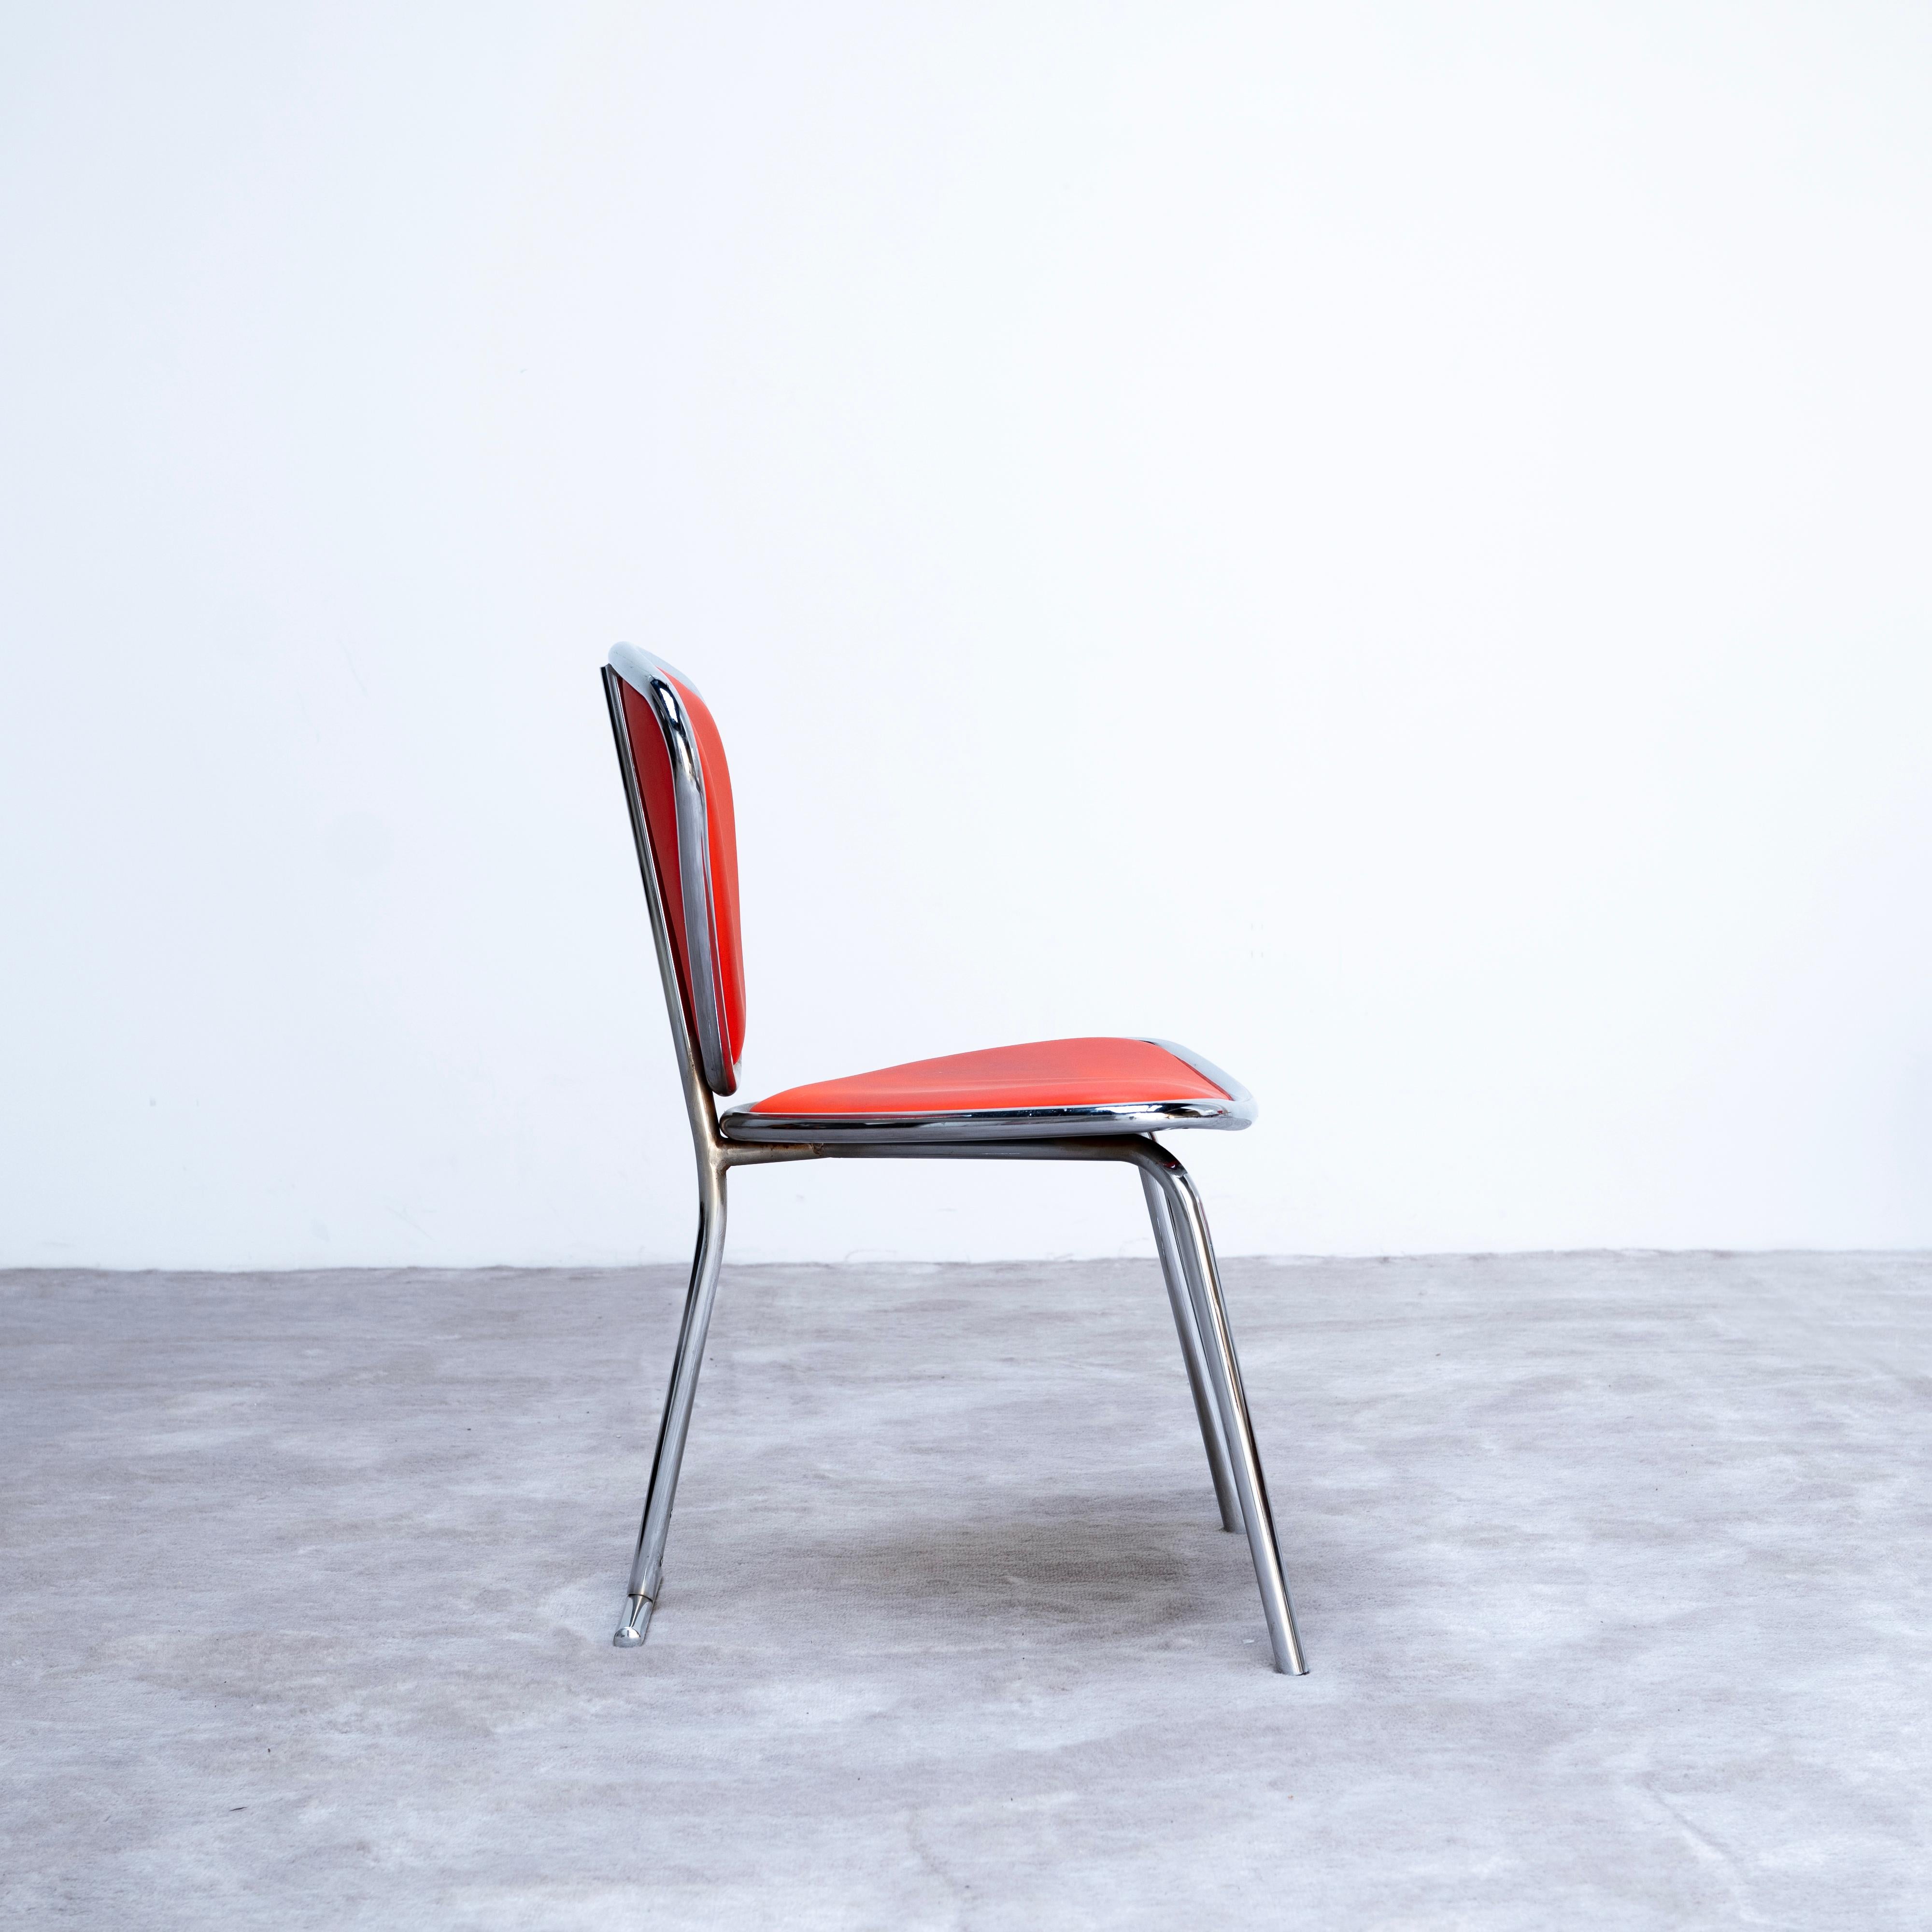 Dning chair From French Institute of Japan - Tokyo by Claudio Colucci 4